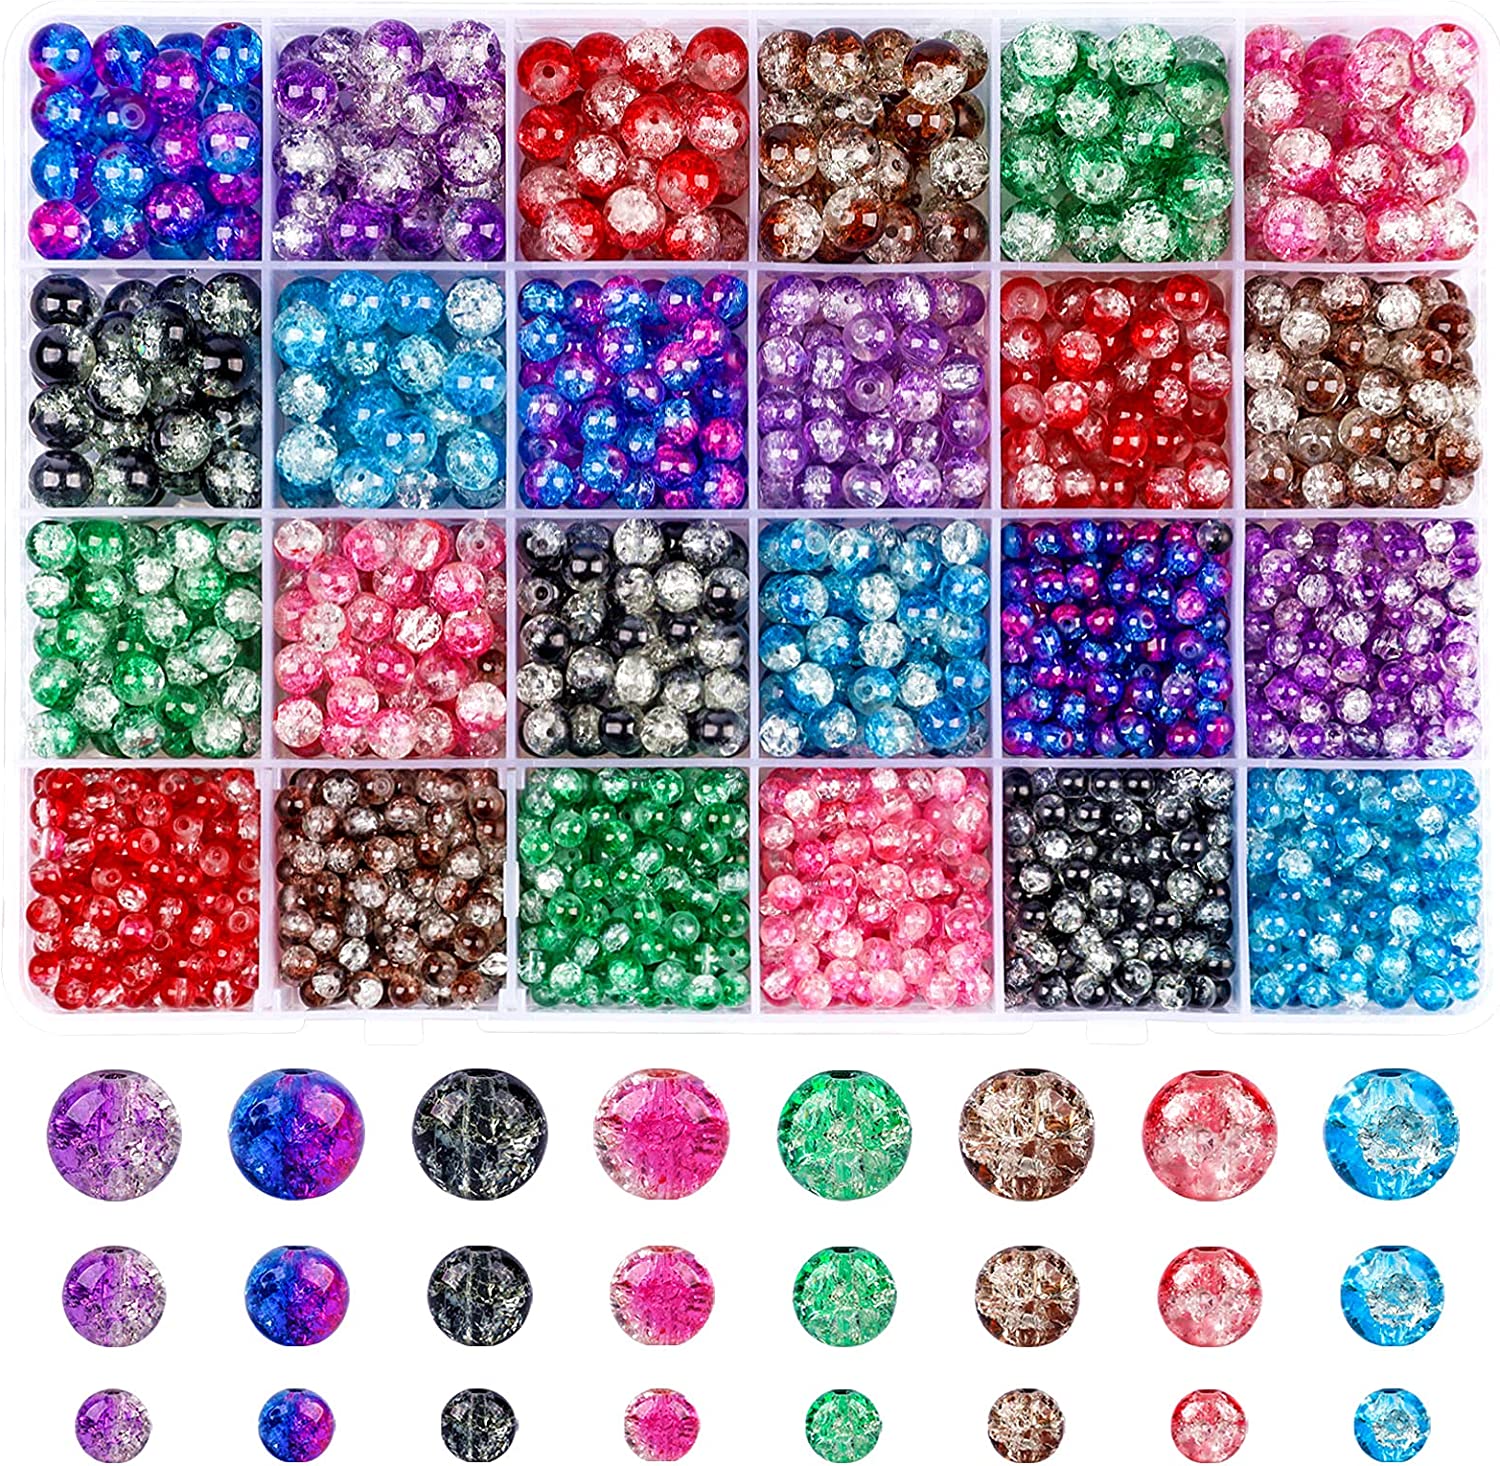 Suhome 1920pcs 8 Color Crackle Lampwork Glass Beads 4mm 6mm 8mm Handcrafted Round Spacer Loose Beads for Jewelry Making